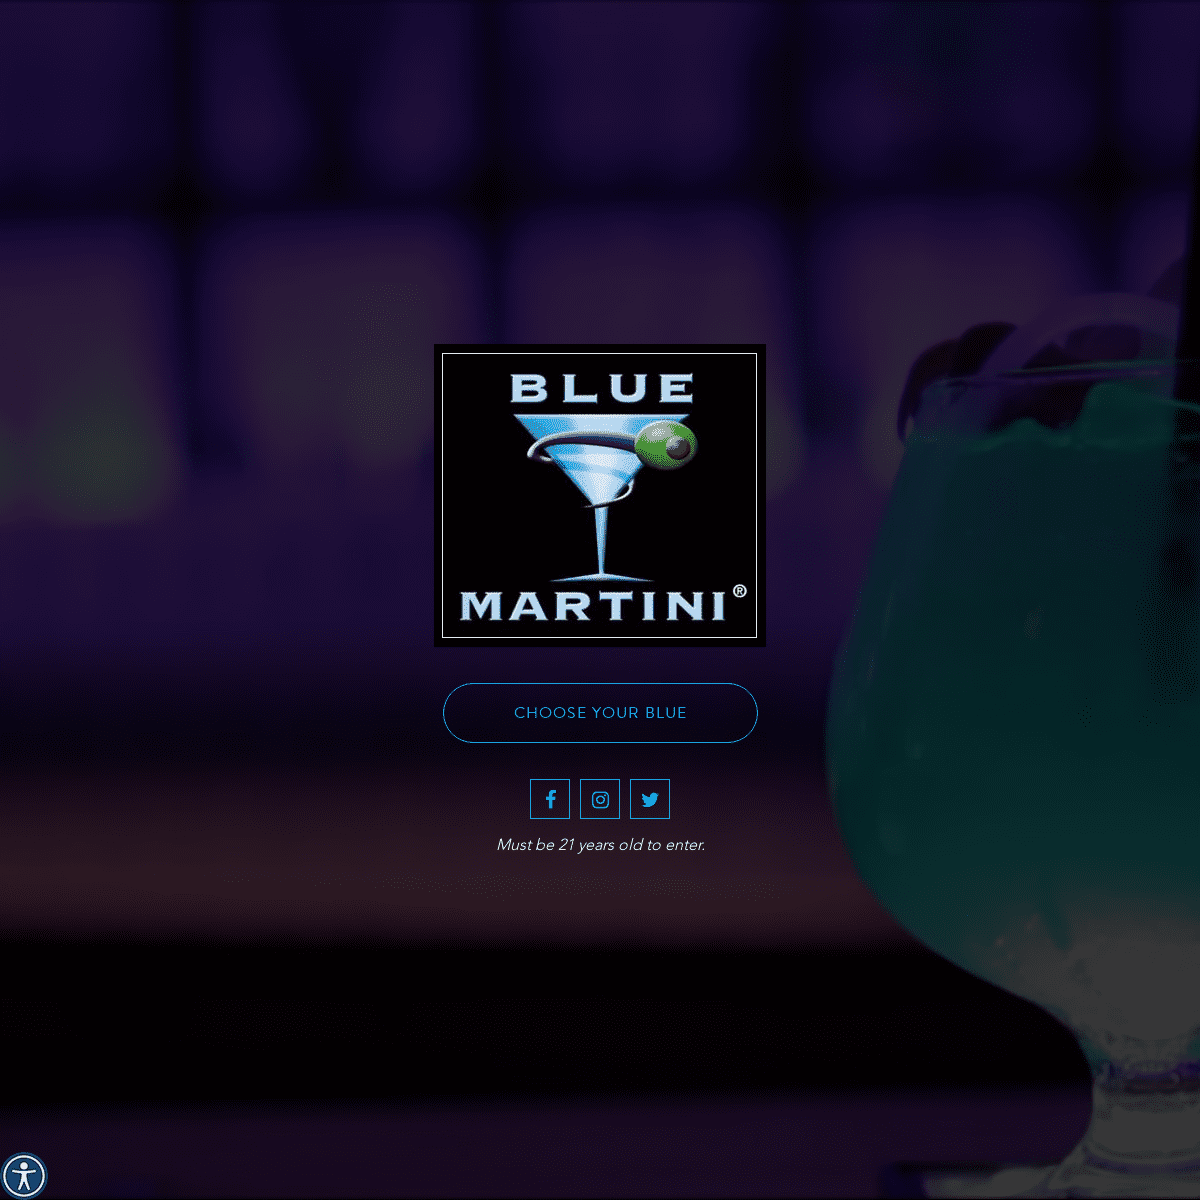 A complete backup of https://bluemartini.com